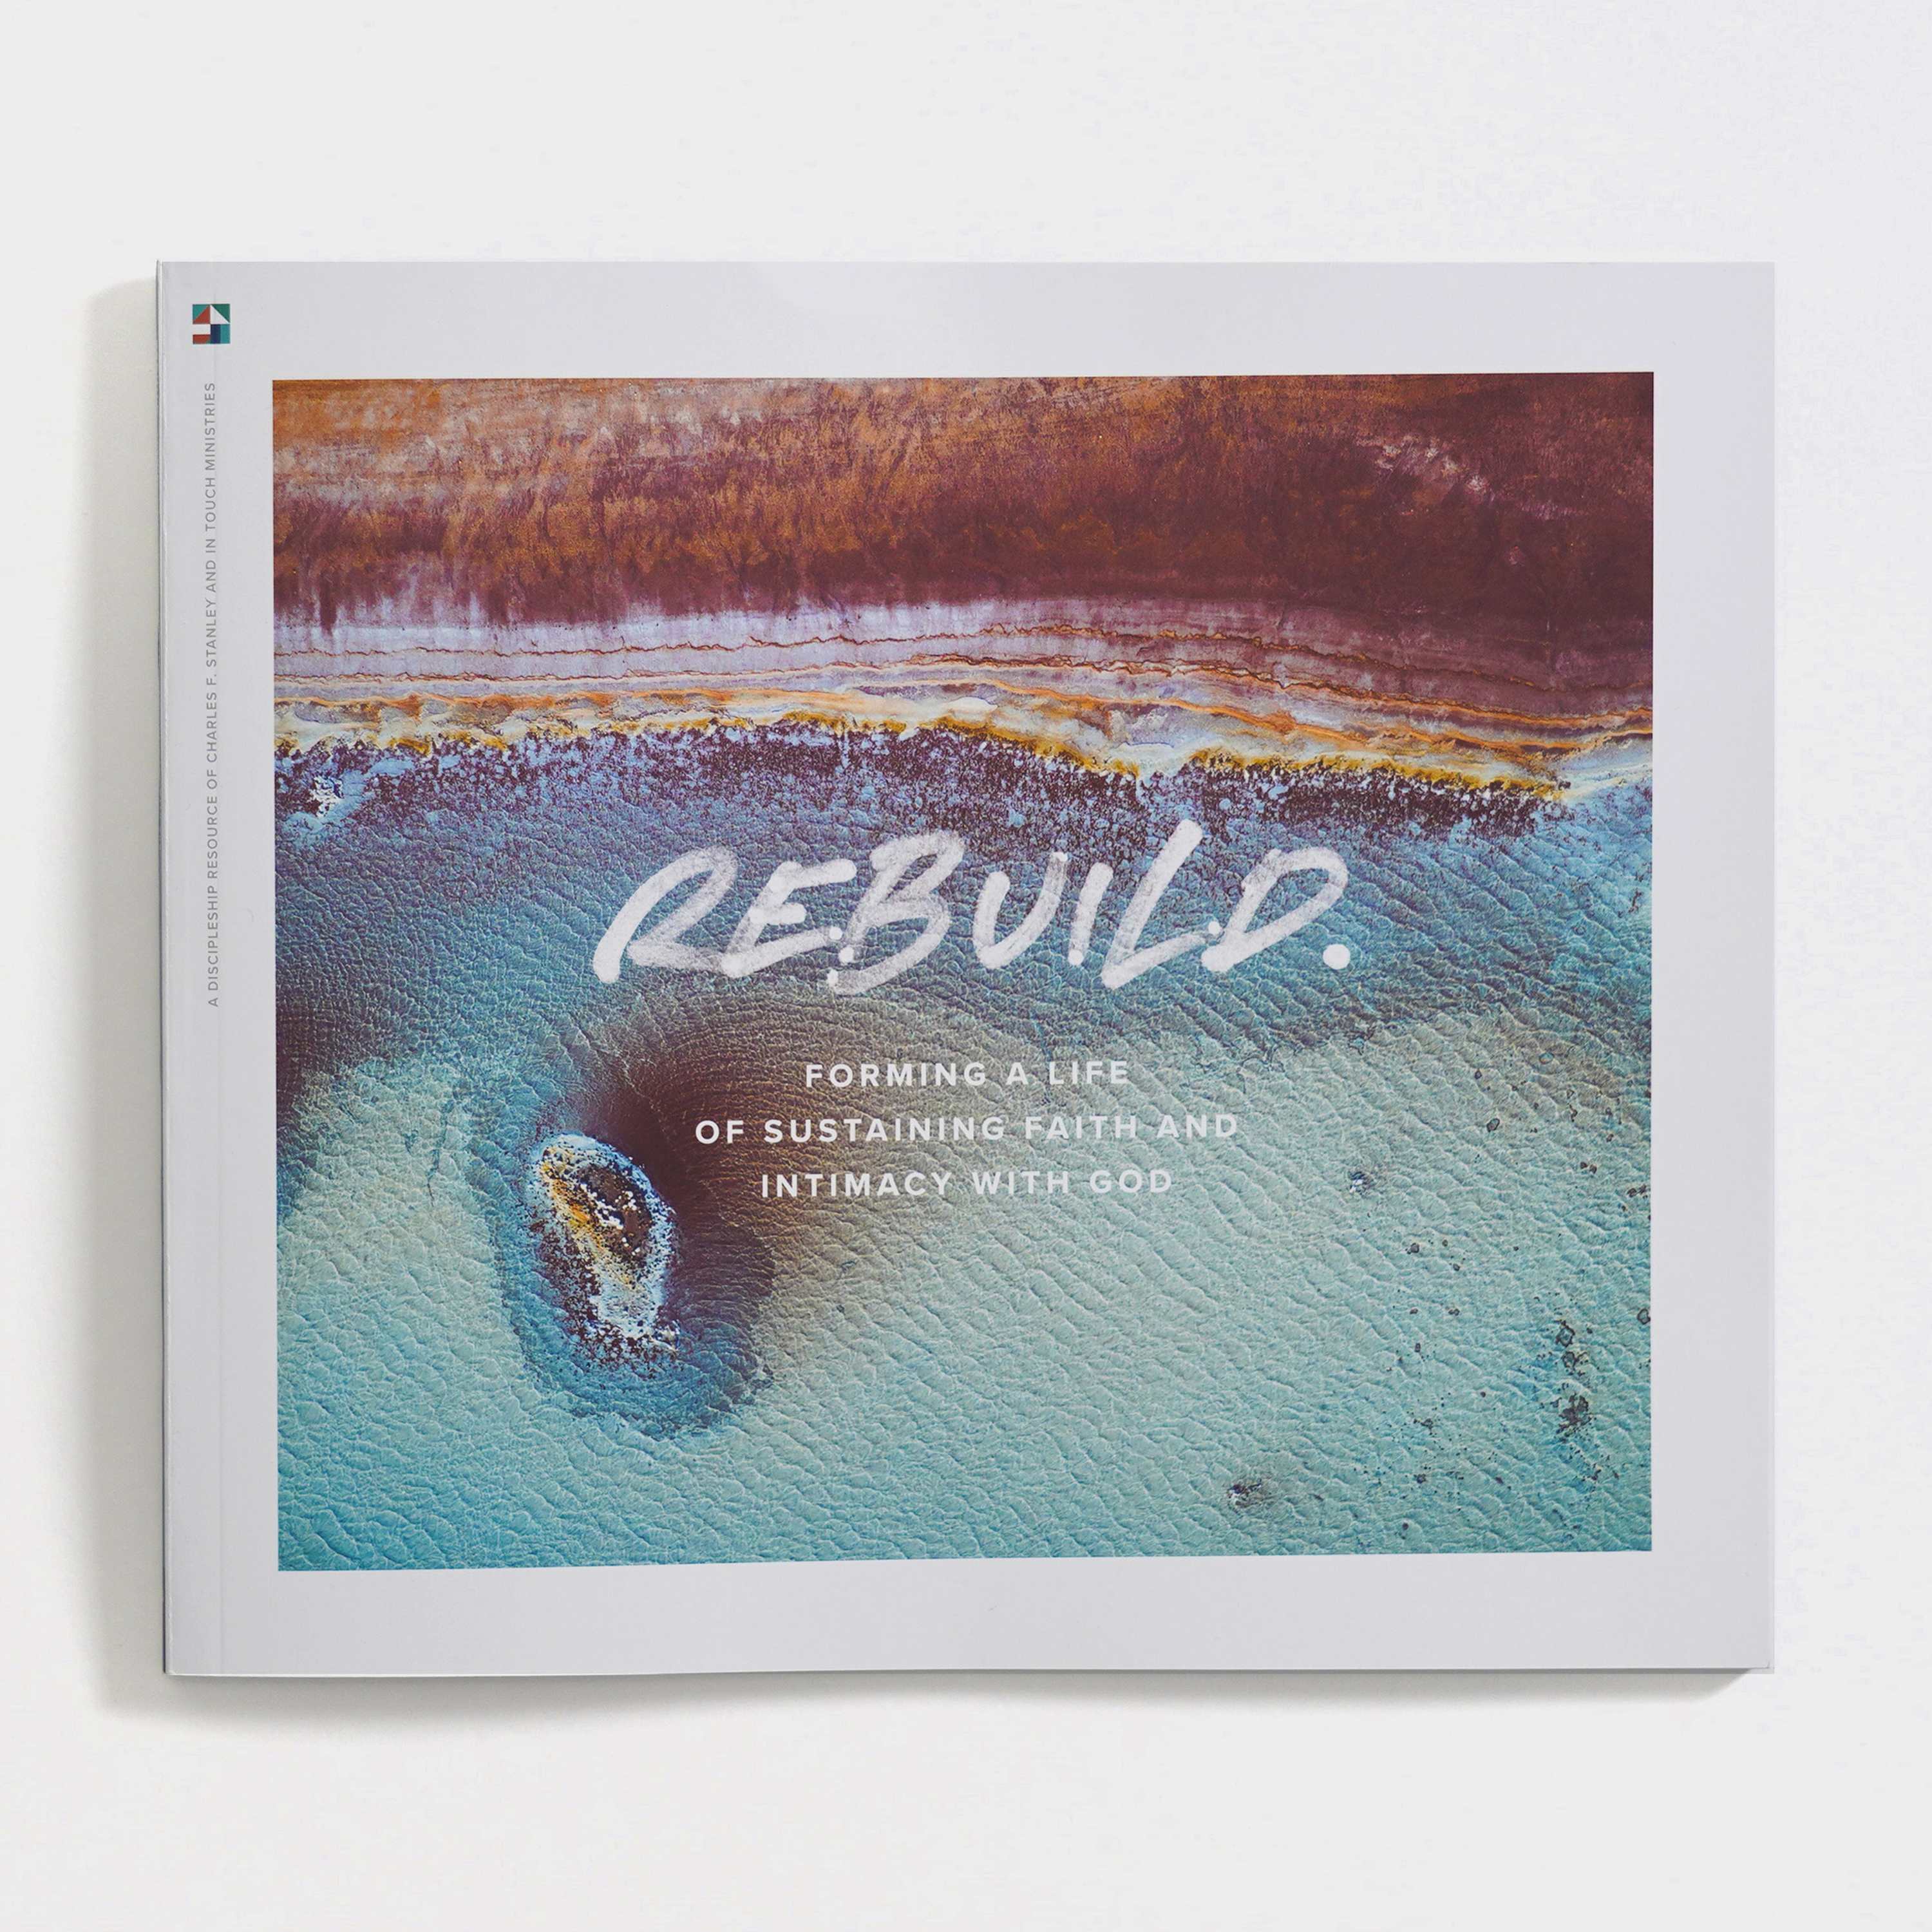 Rebuild: Forming a Life of Sustaining Faith and Intimacy with God